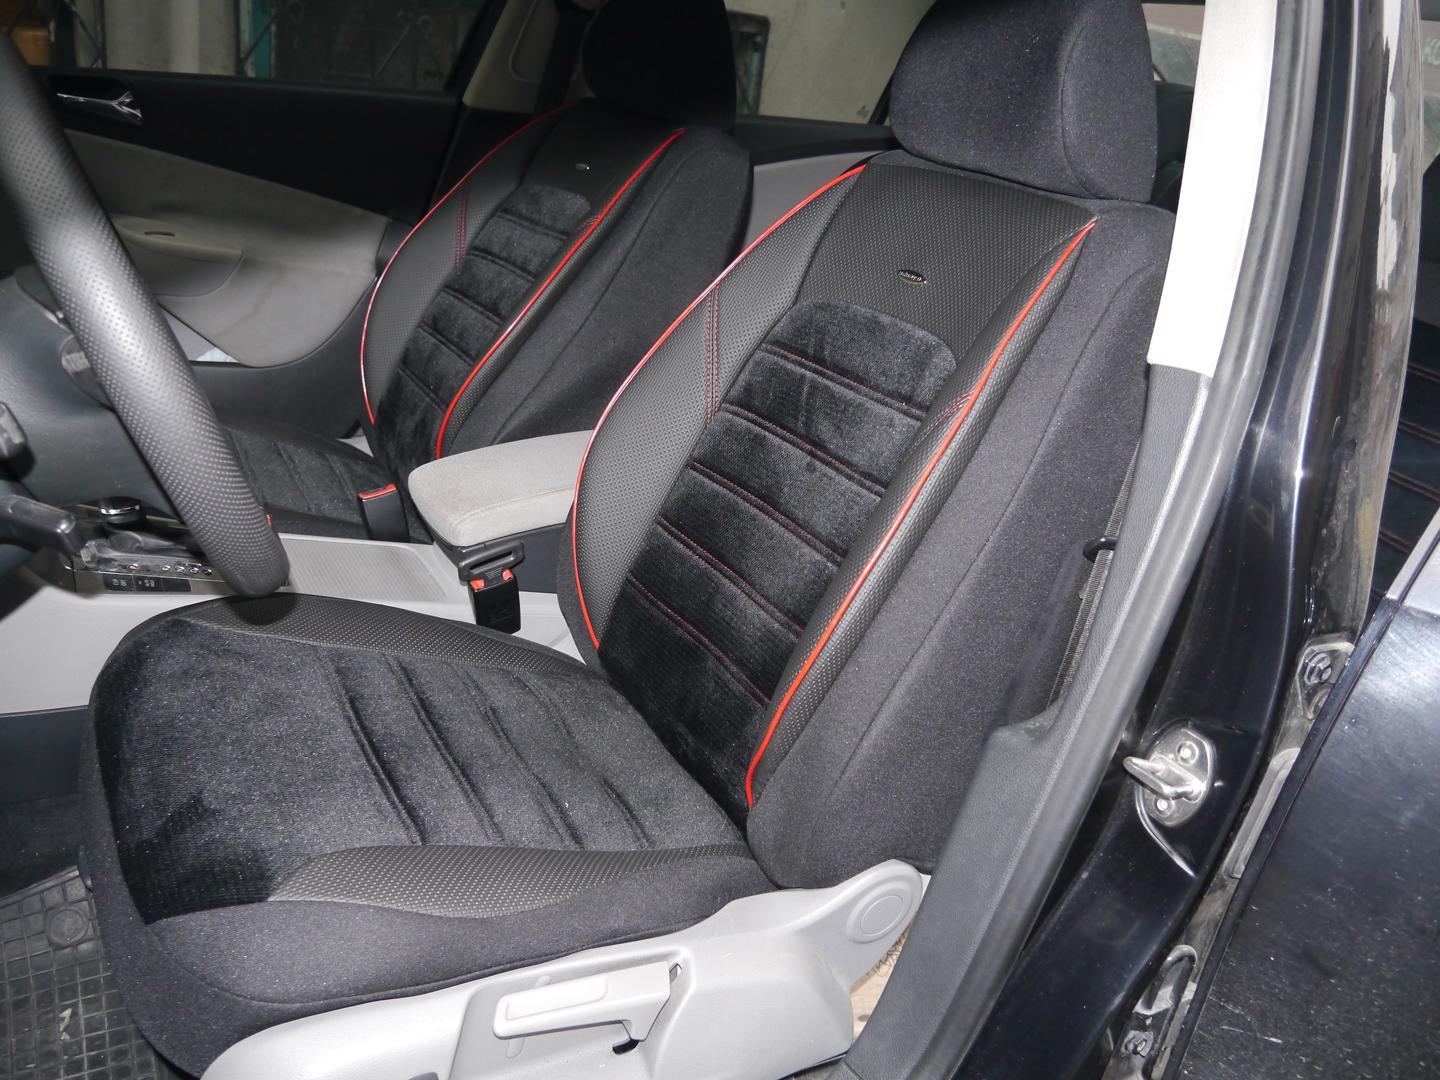 Car Seat Covers Protectors For Vw Golf Mk6 No4 - Official Vw Golf Seat Covers